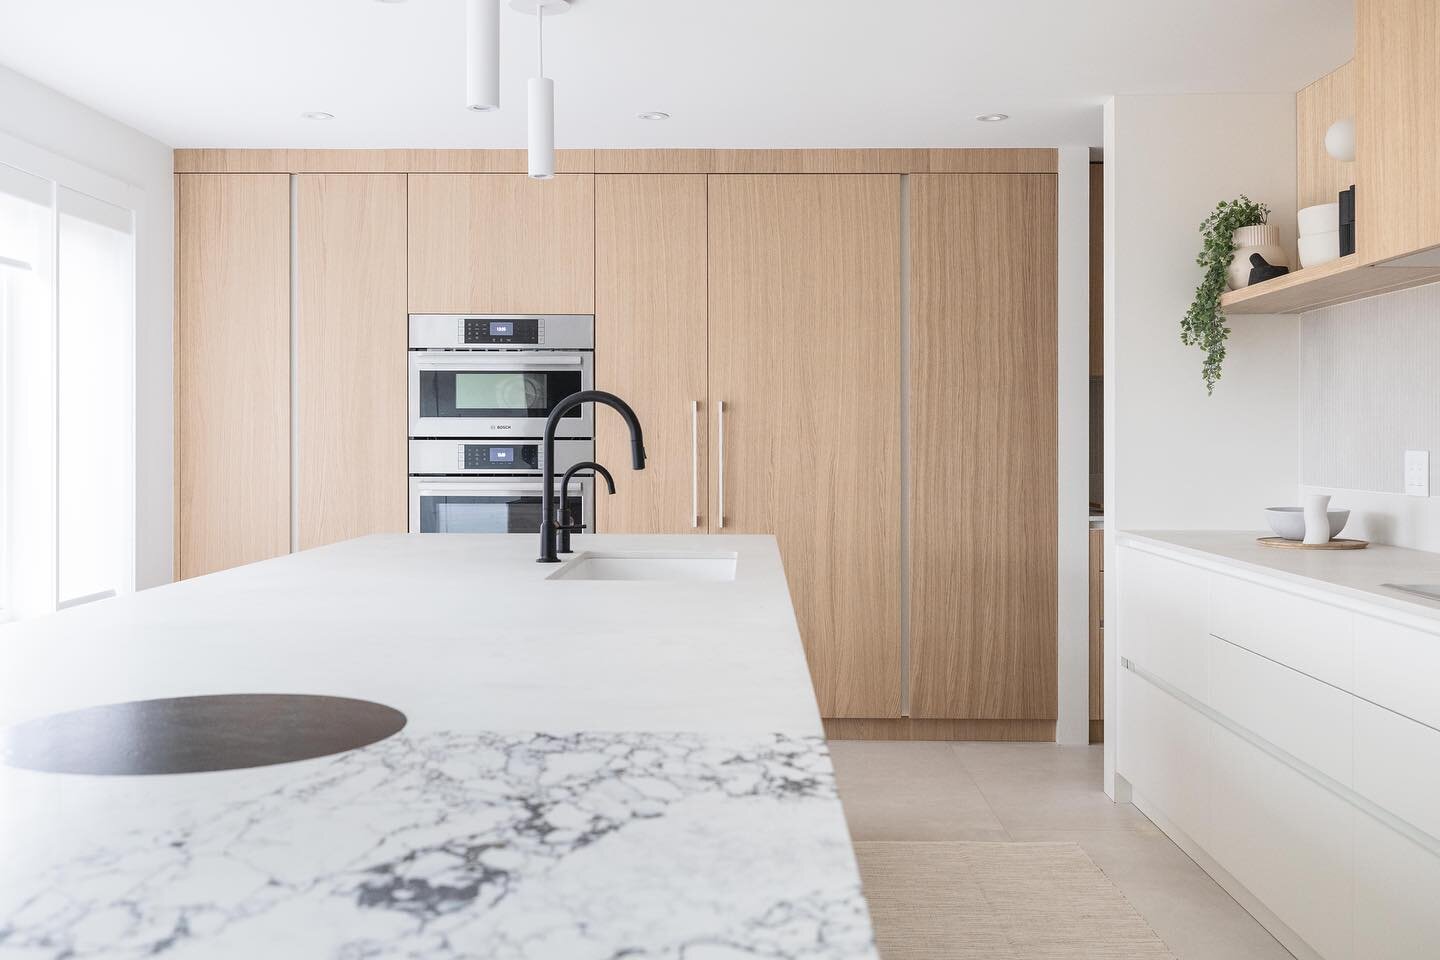 It&rsquo;s all about the art of the kitchen layout! We used the windowless back wall as floor-to-ceiling closed storage for the fridge, ovens and pantries. The remainder of the kitchen is left airy and open for natural light to flow through. The isla